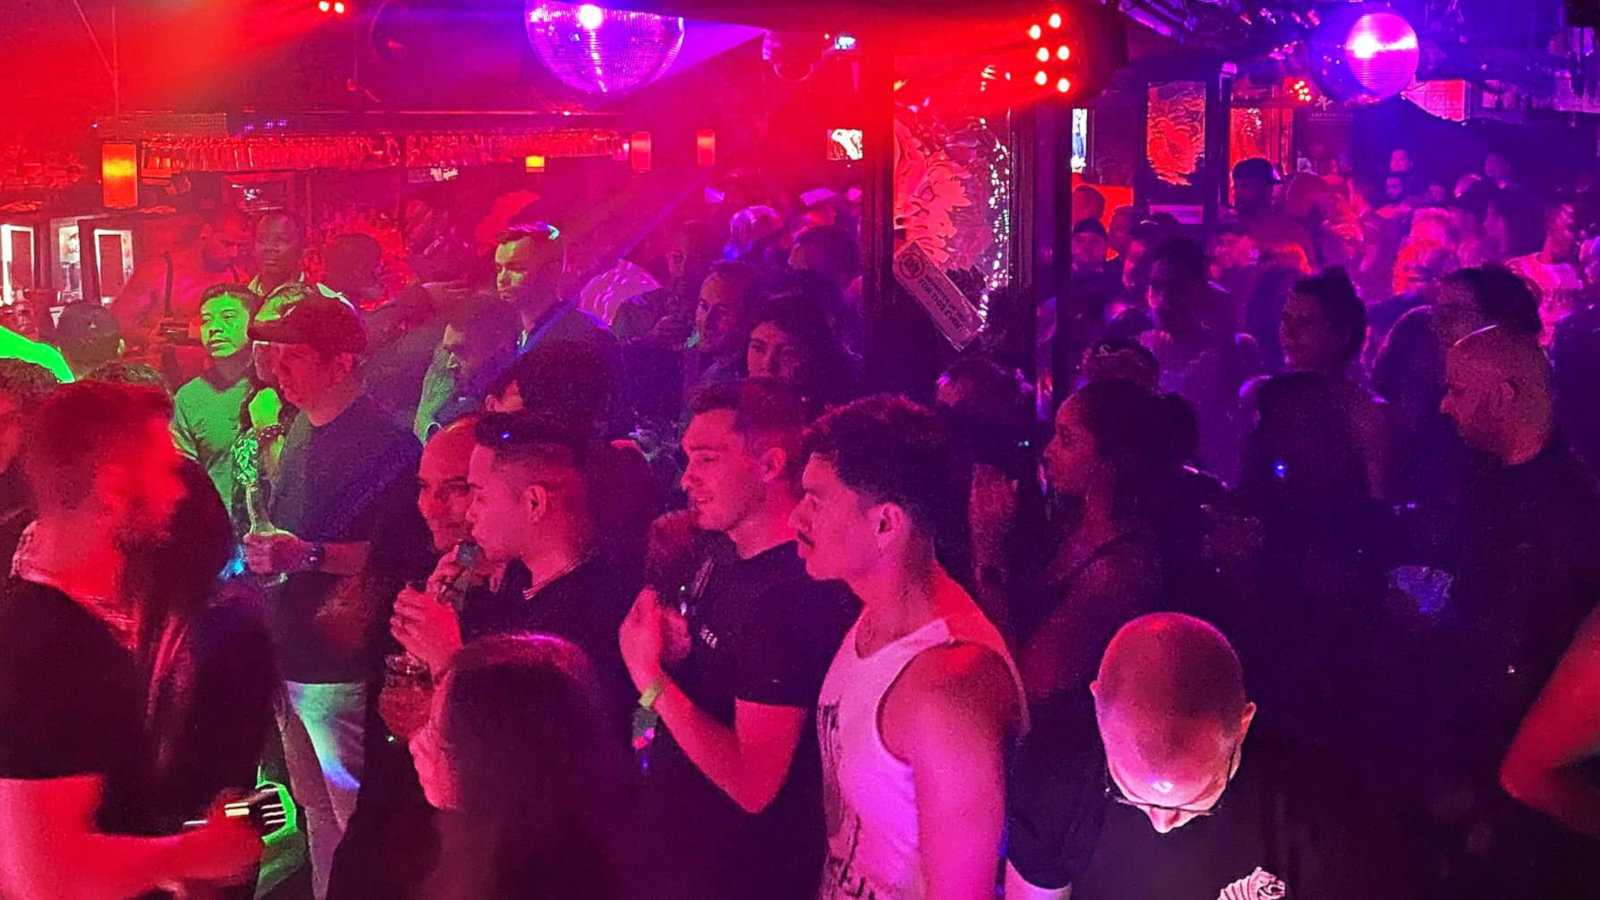 Top Gay Bars Chicago: 10 Bars for Drinking and Dancing